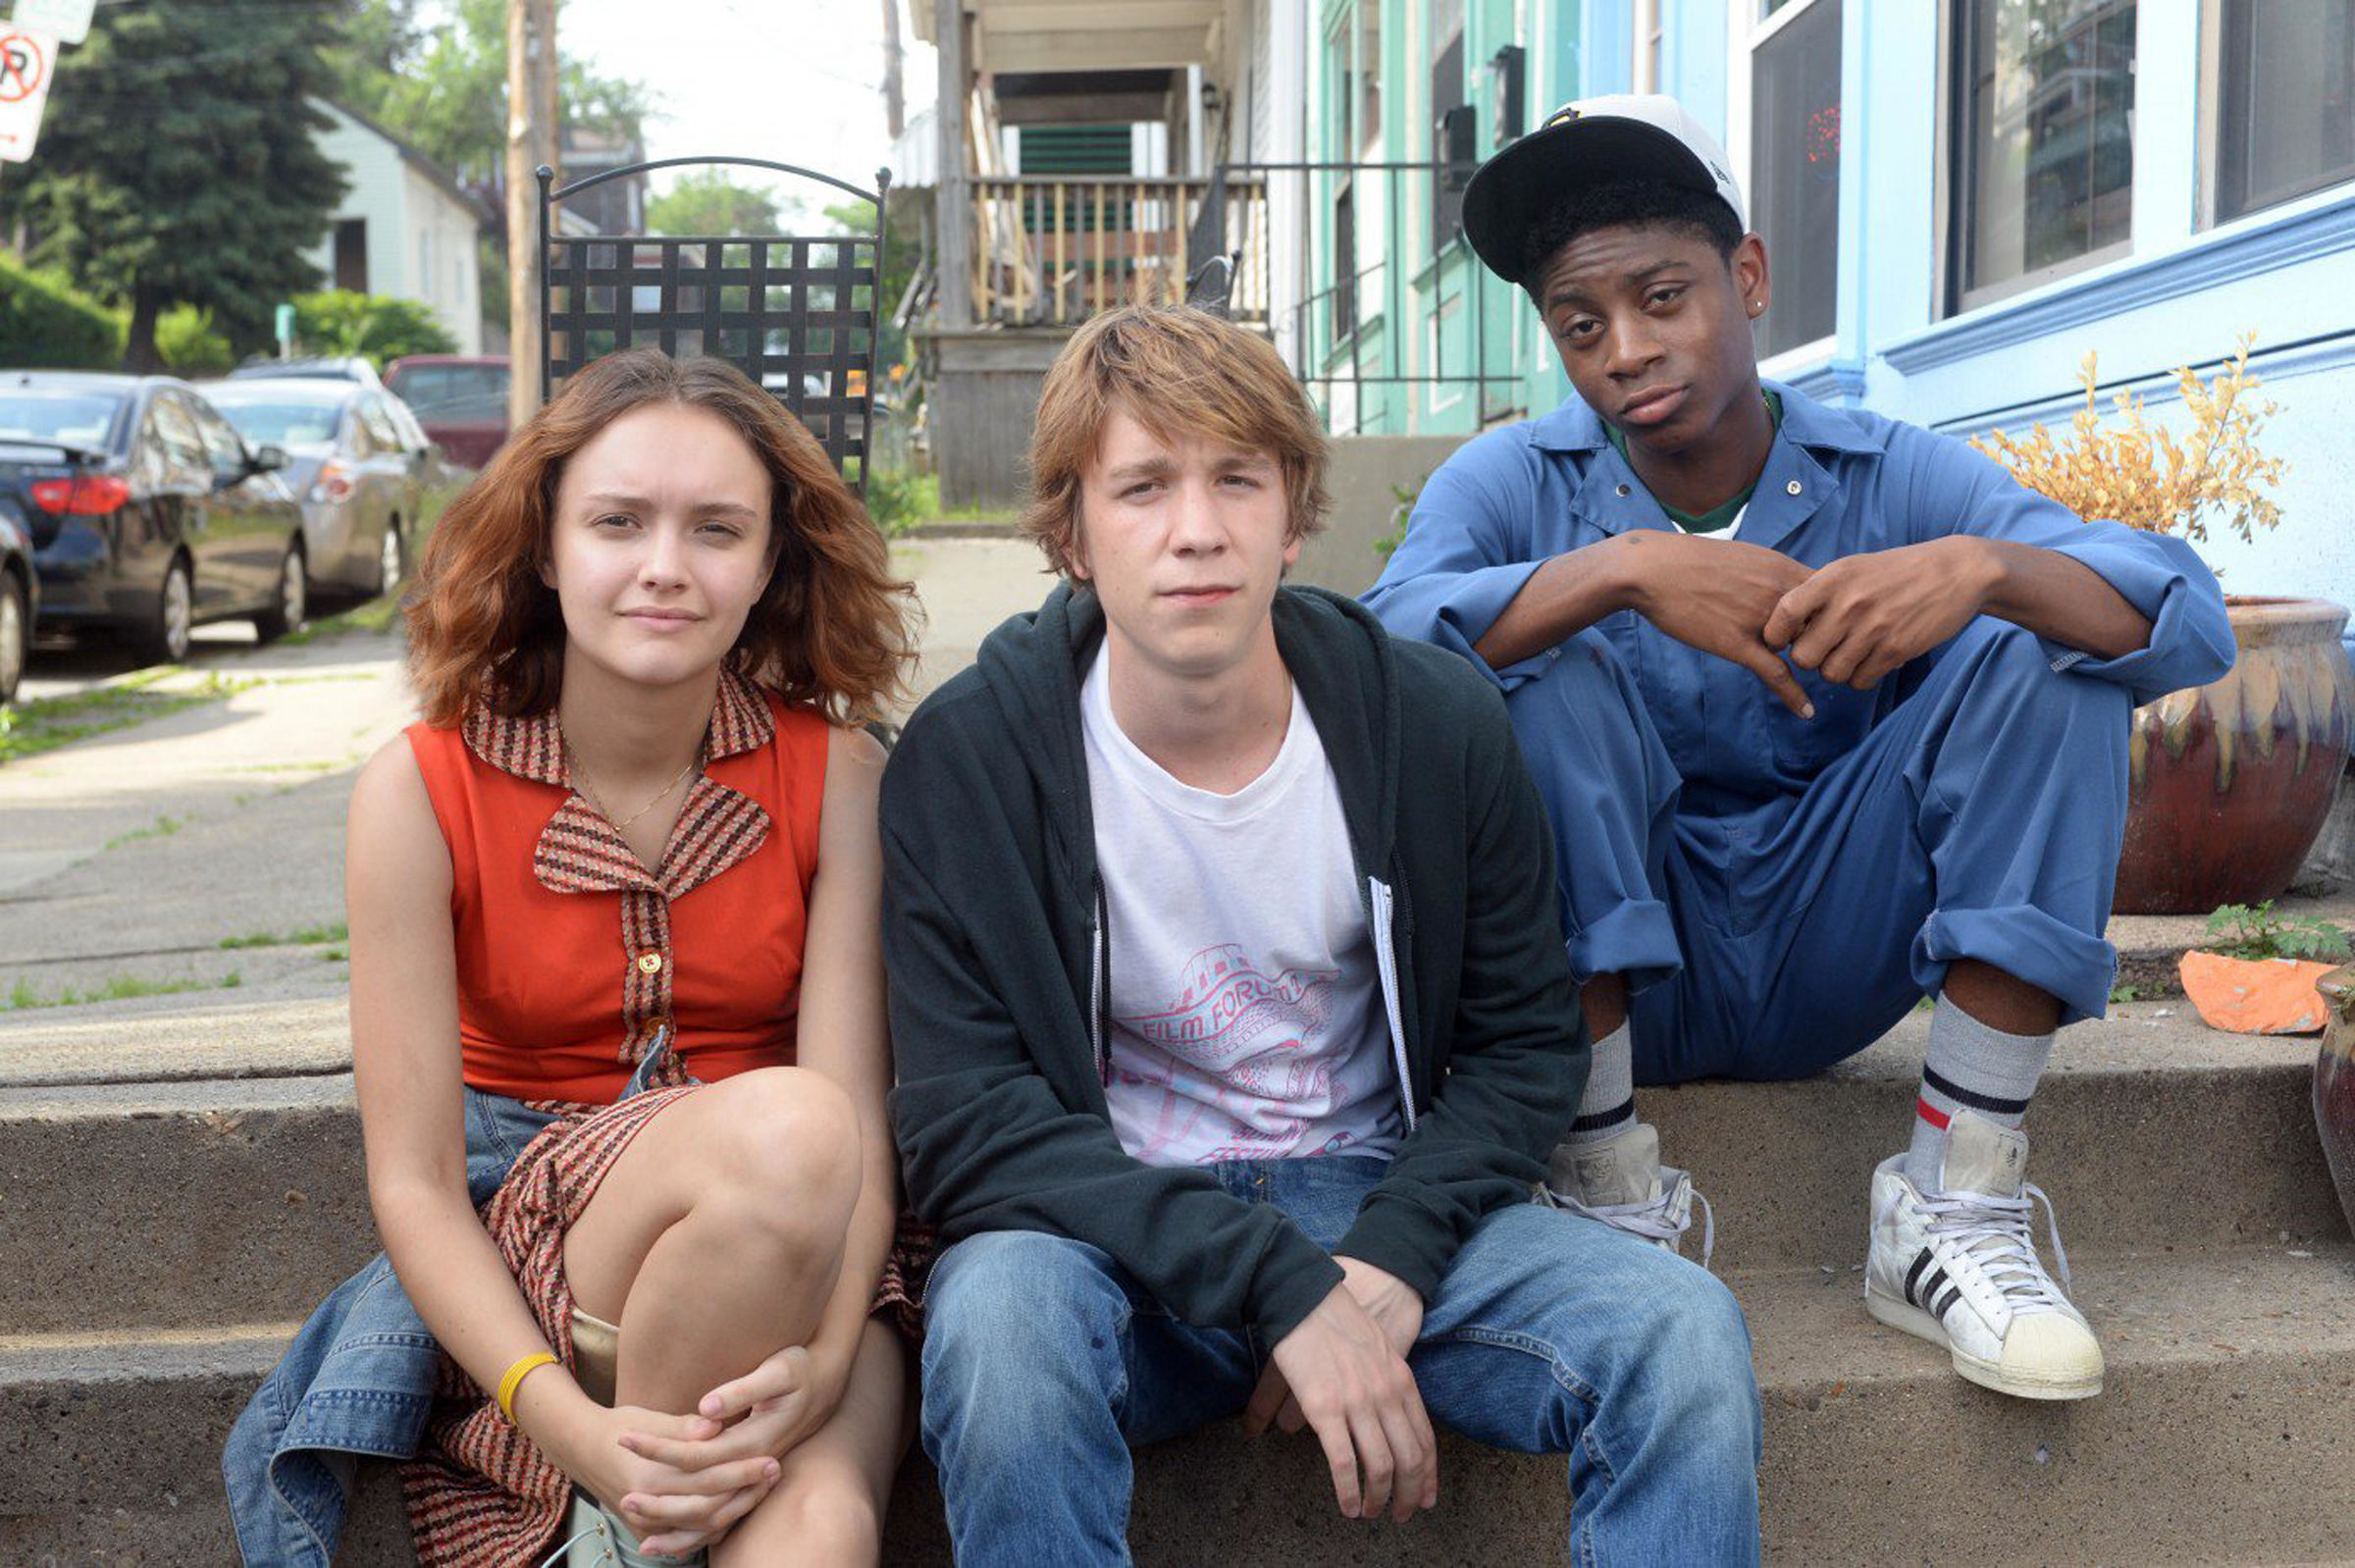 Three teenagers sitting on a sidewalk pose for a picture